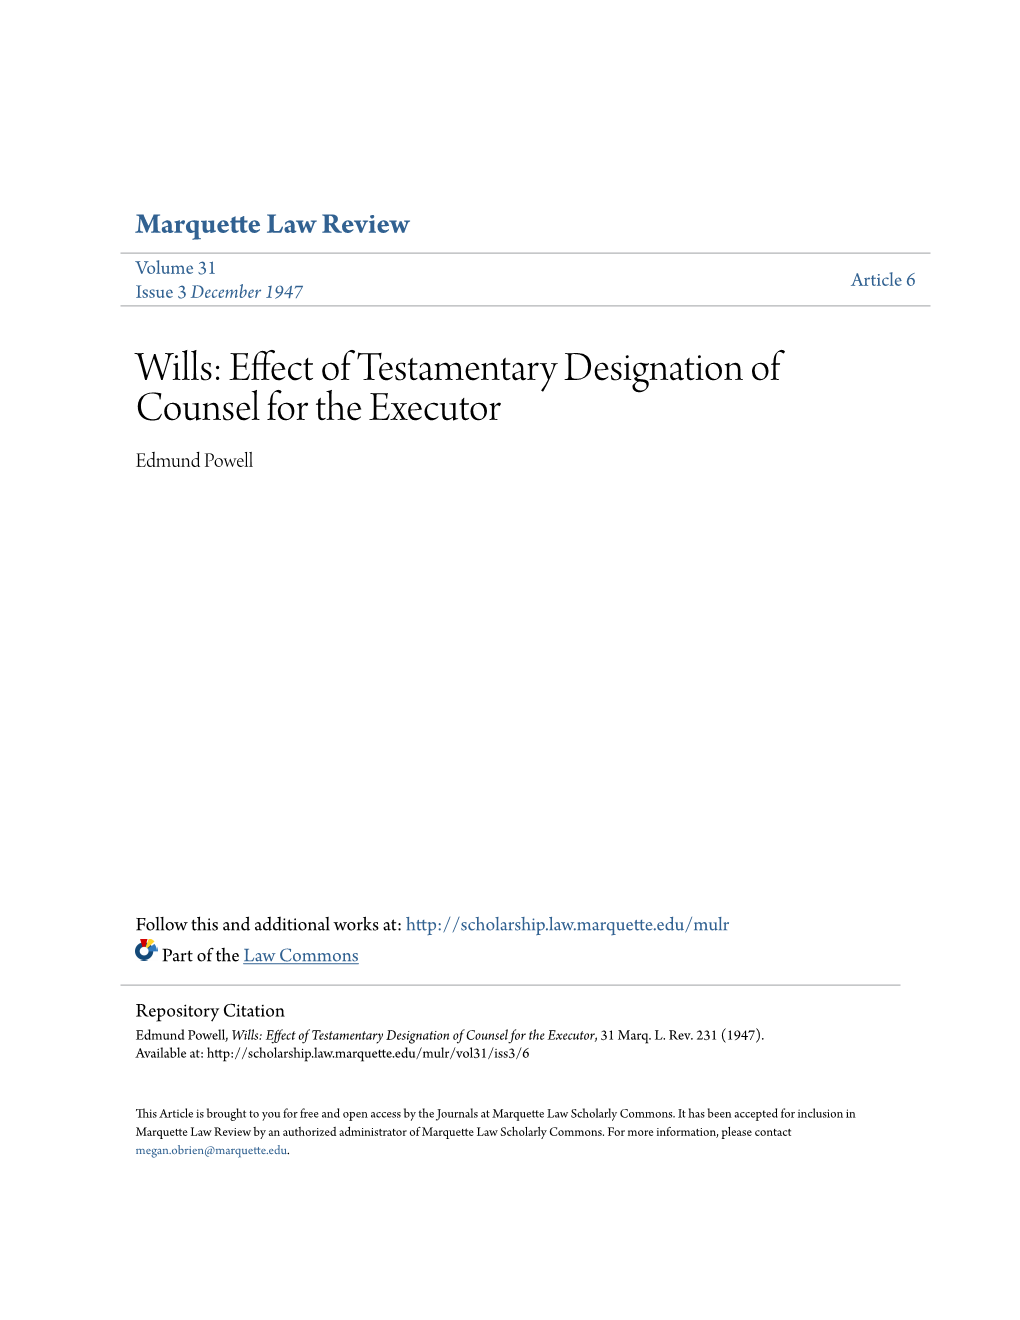 Wills: Effect of Testamentary Designation of Counsel for the Executor Edmund Powell